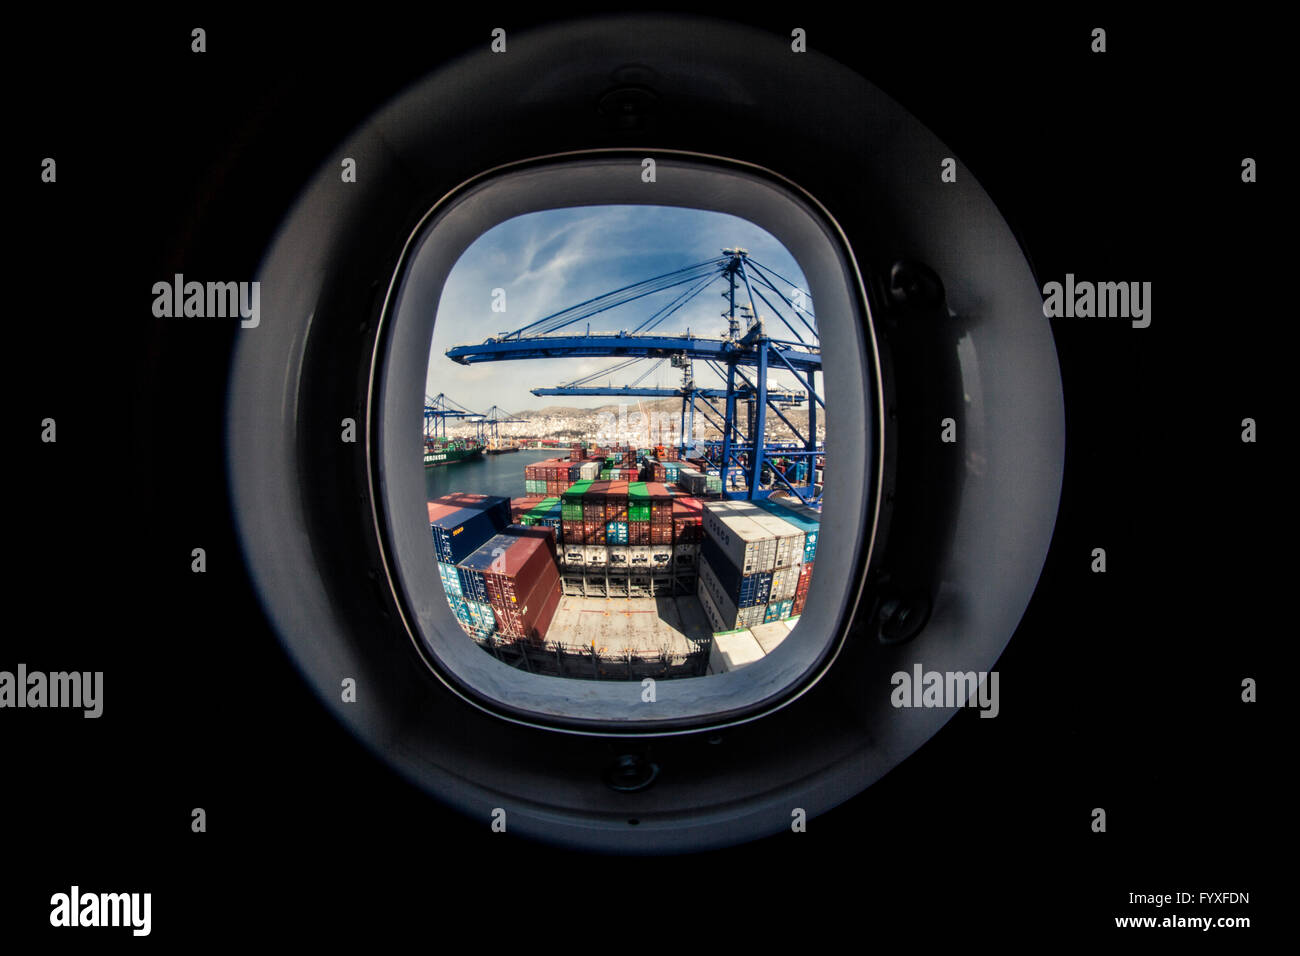 Watching a container ship being loaded from a window on one of the living quarters decks. Stock Photo